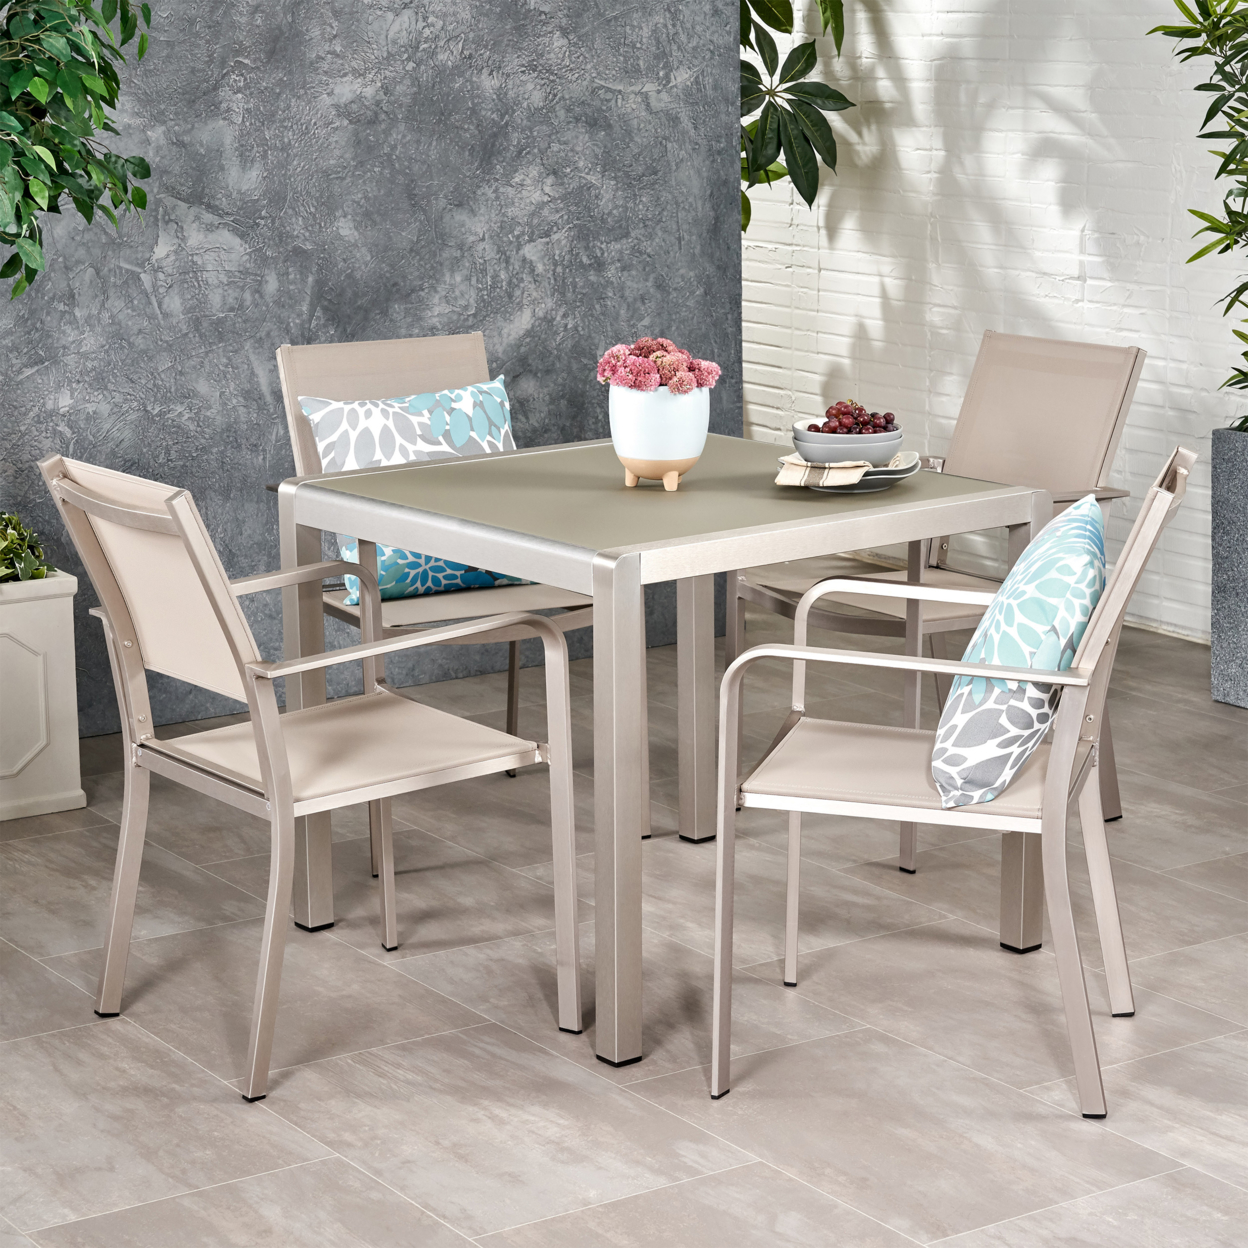 Annabelle Outdoor Modern 4 Seater Aluminum Dining Set With Faux Wood Table Top - Aluminum + Tempered Glass + Outdoor Mesh